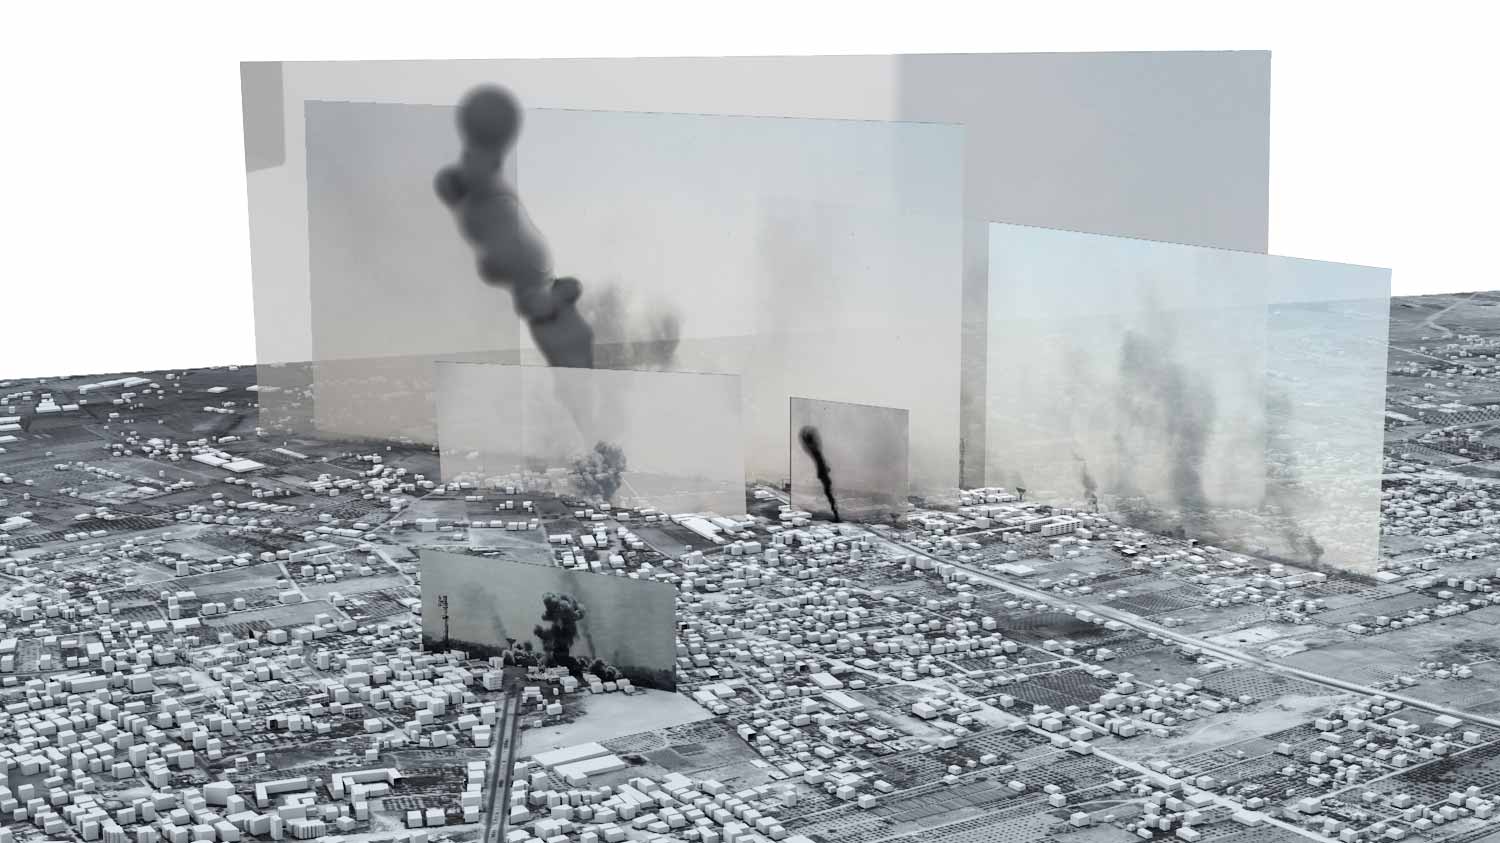 Photographs and videos located within a 3D model telling the story of one of the heaviest days of bombardment in the 2014 Israel-Gaza war